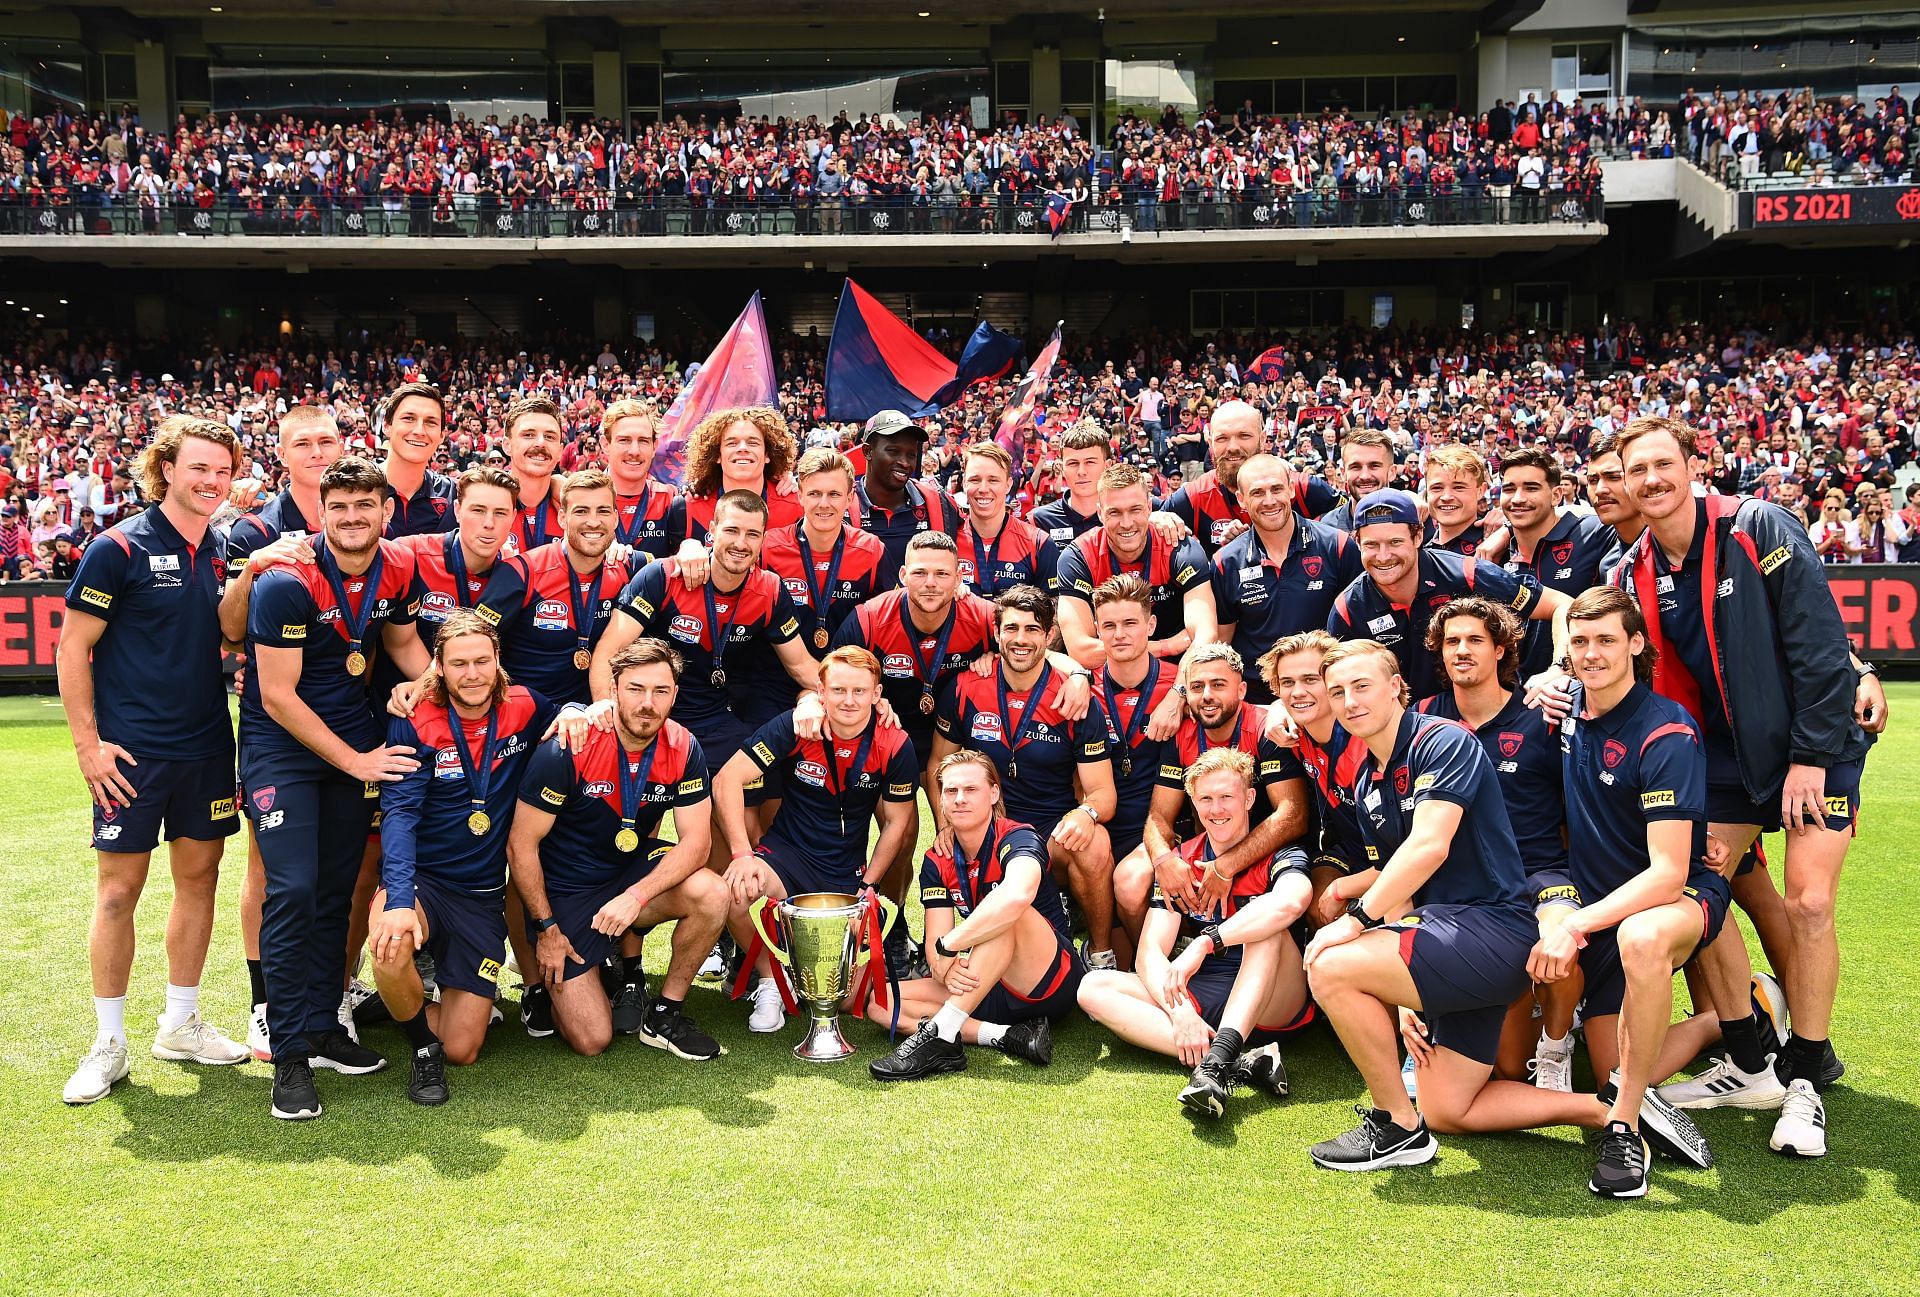 The Demons pose with the trophy during the Melbourne Demons AFL Premiership Celebration